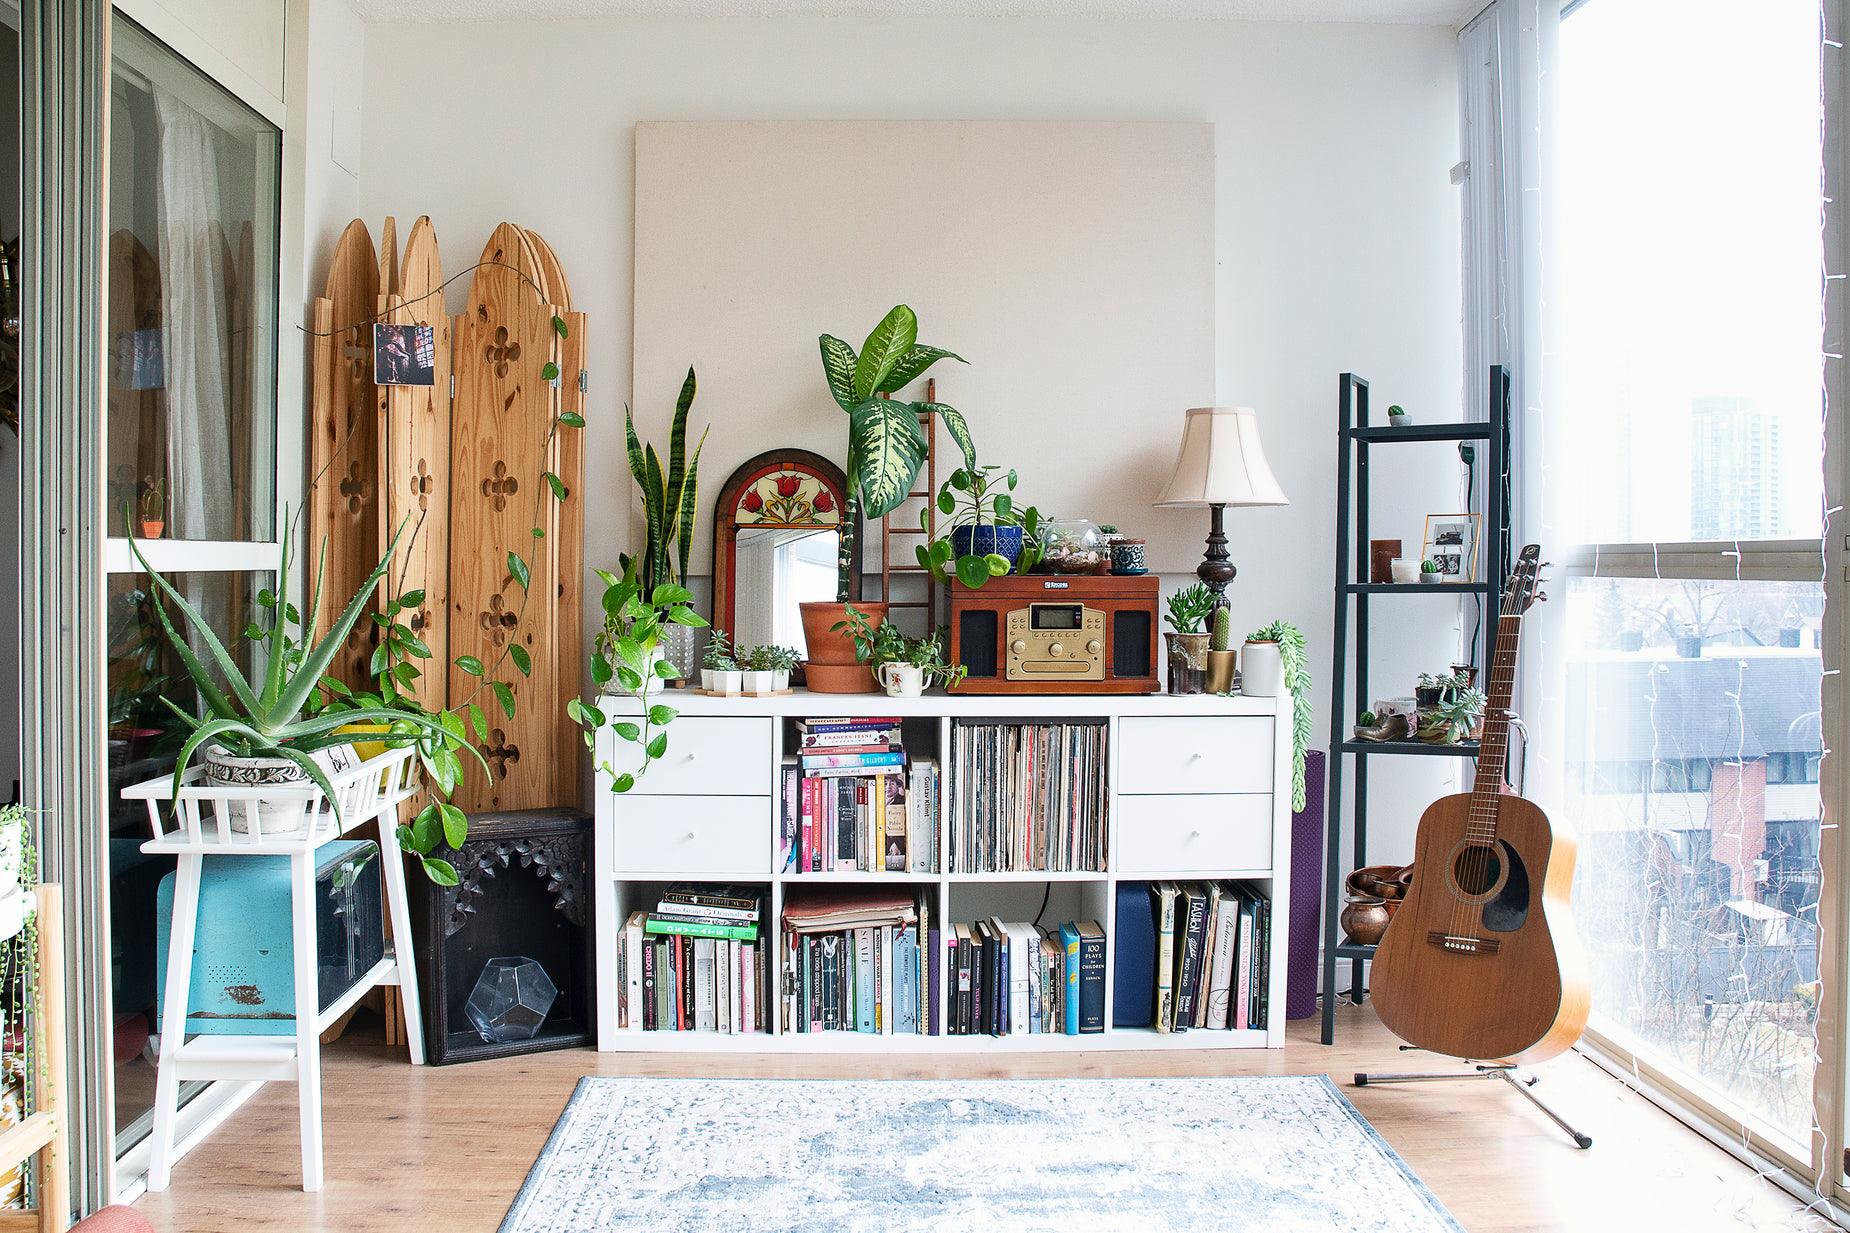 the living room is cluttered and has plants, bookshelf and a guitar